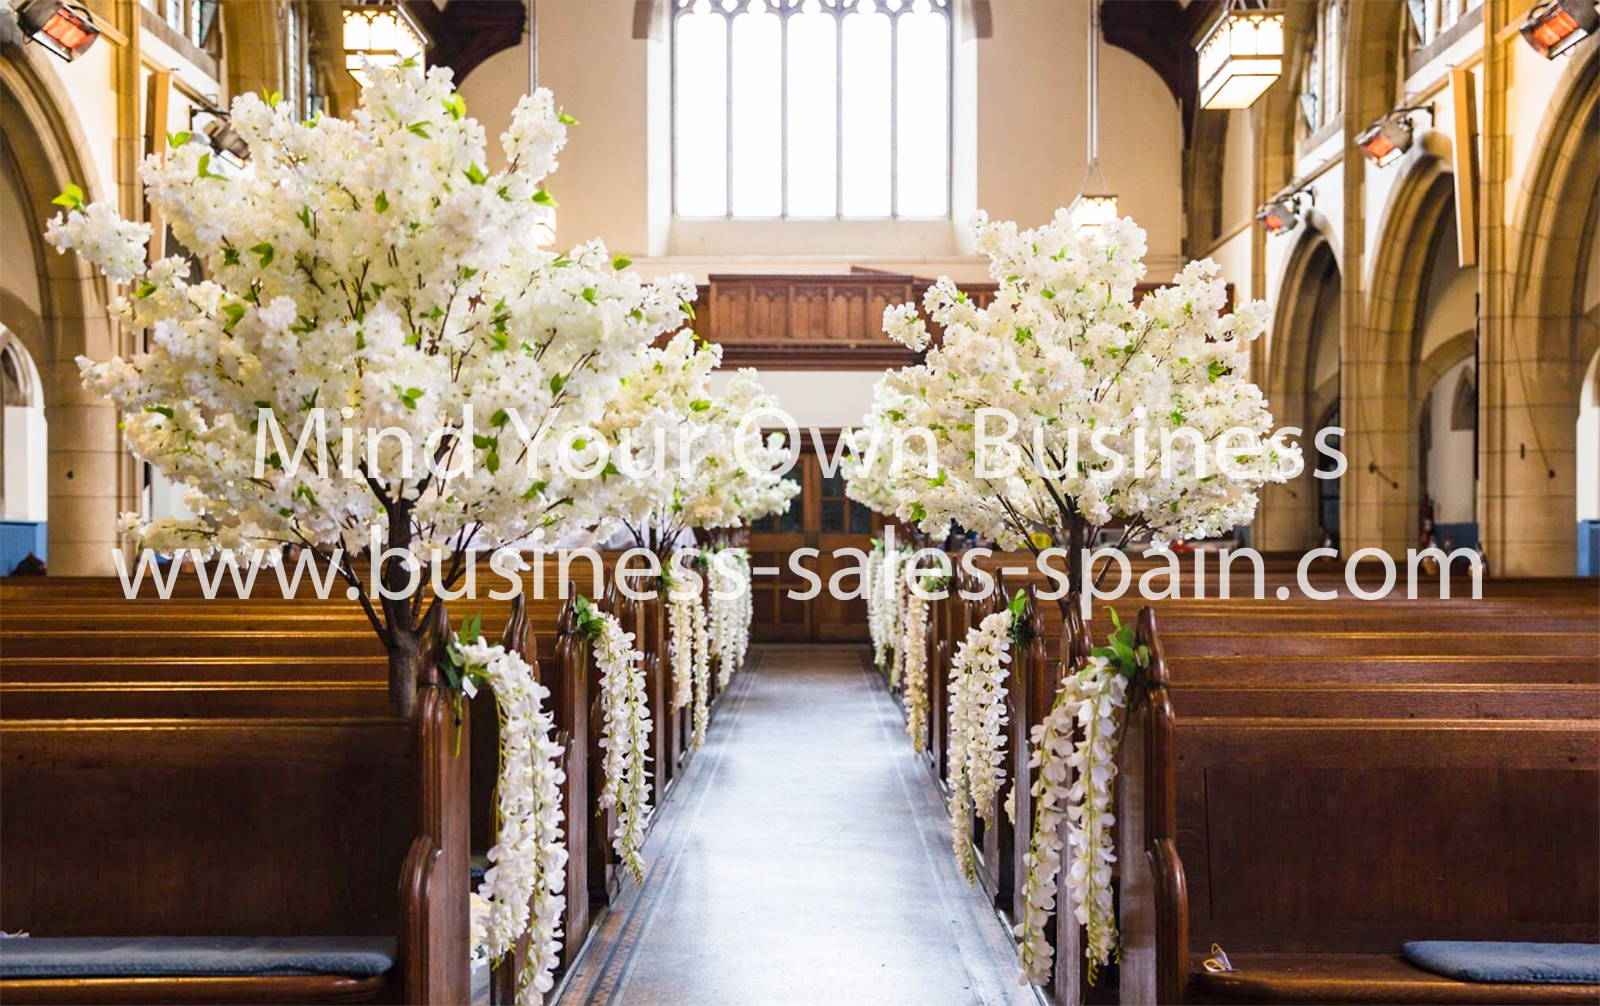 Event Styling and Decoration Business Supplying Weddings Other Functions and Events